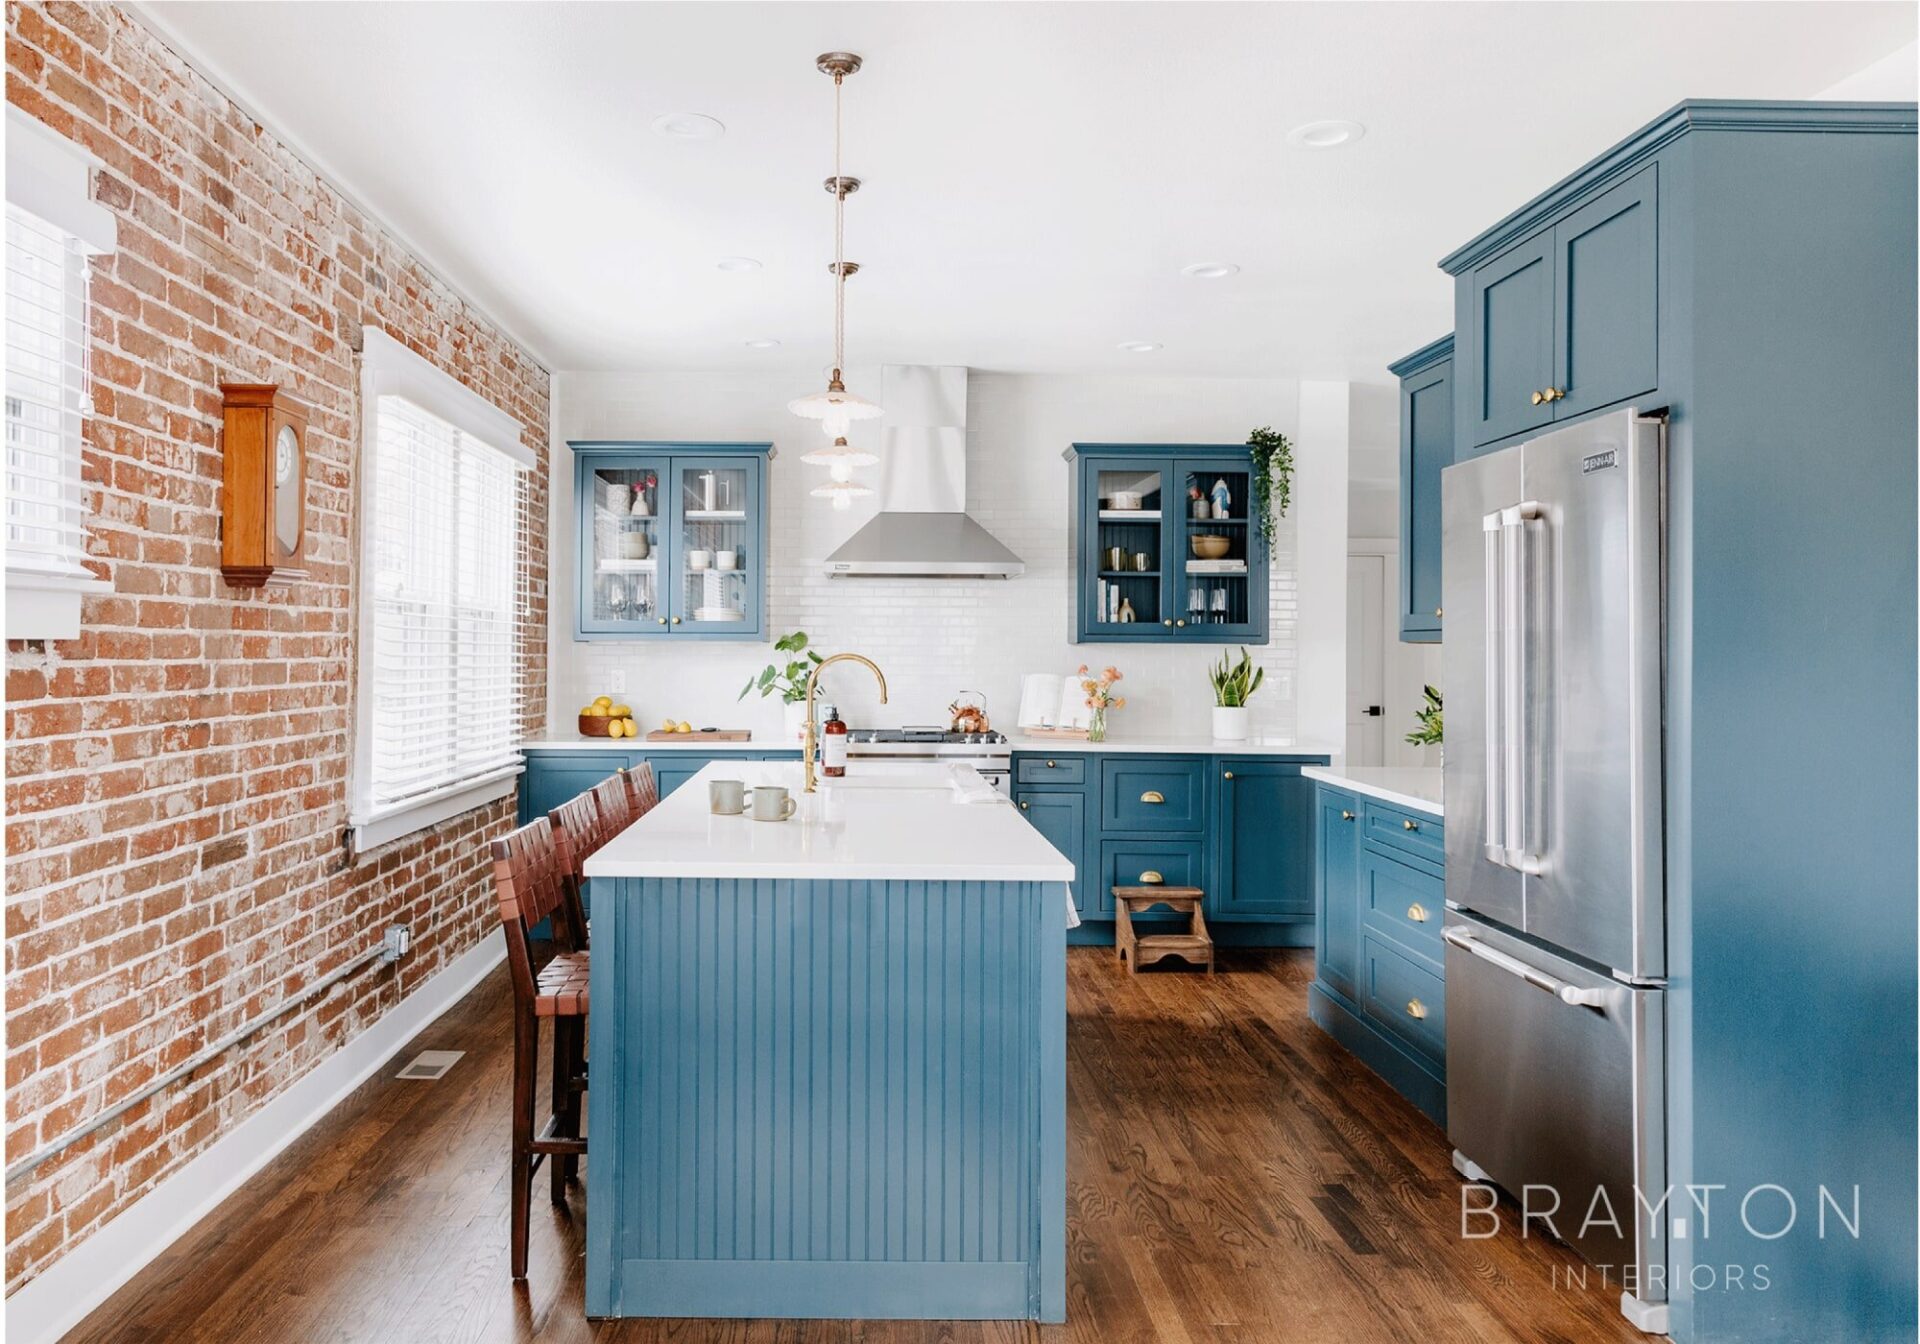 Exposed brick in historic Denver bungalow home renovation. Handcrafted, thoughtful details, refinished hardwood floors, ceramic pendant lights and brass hardware throughout.